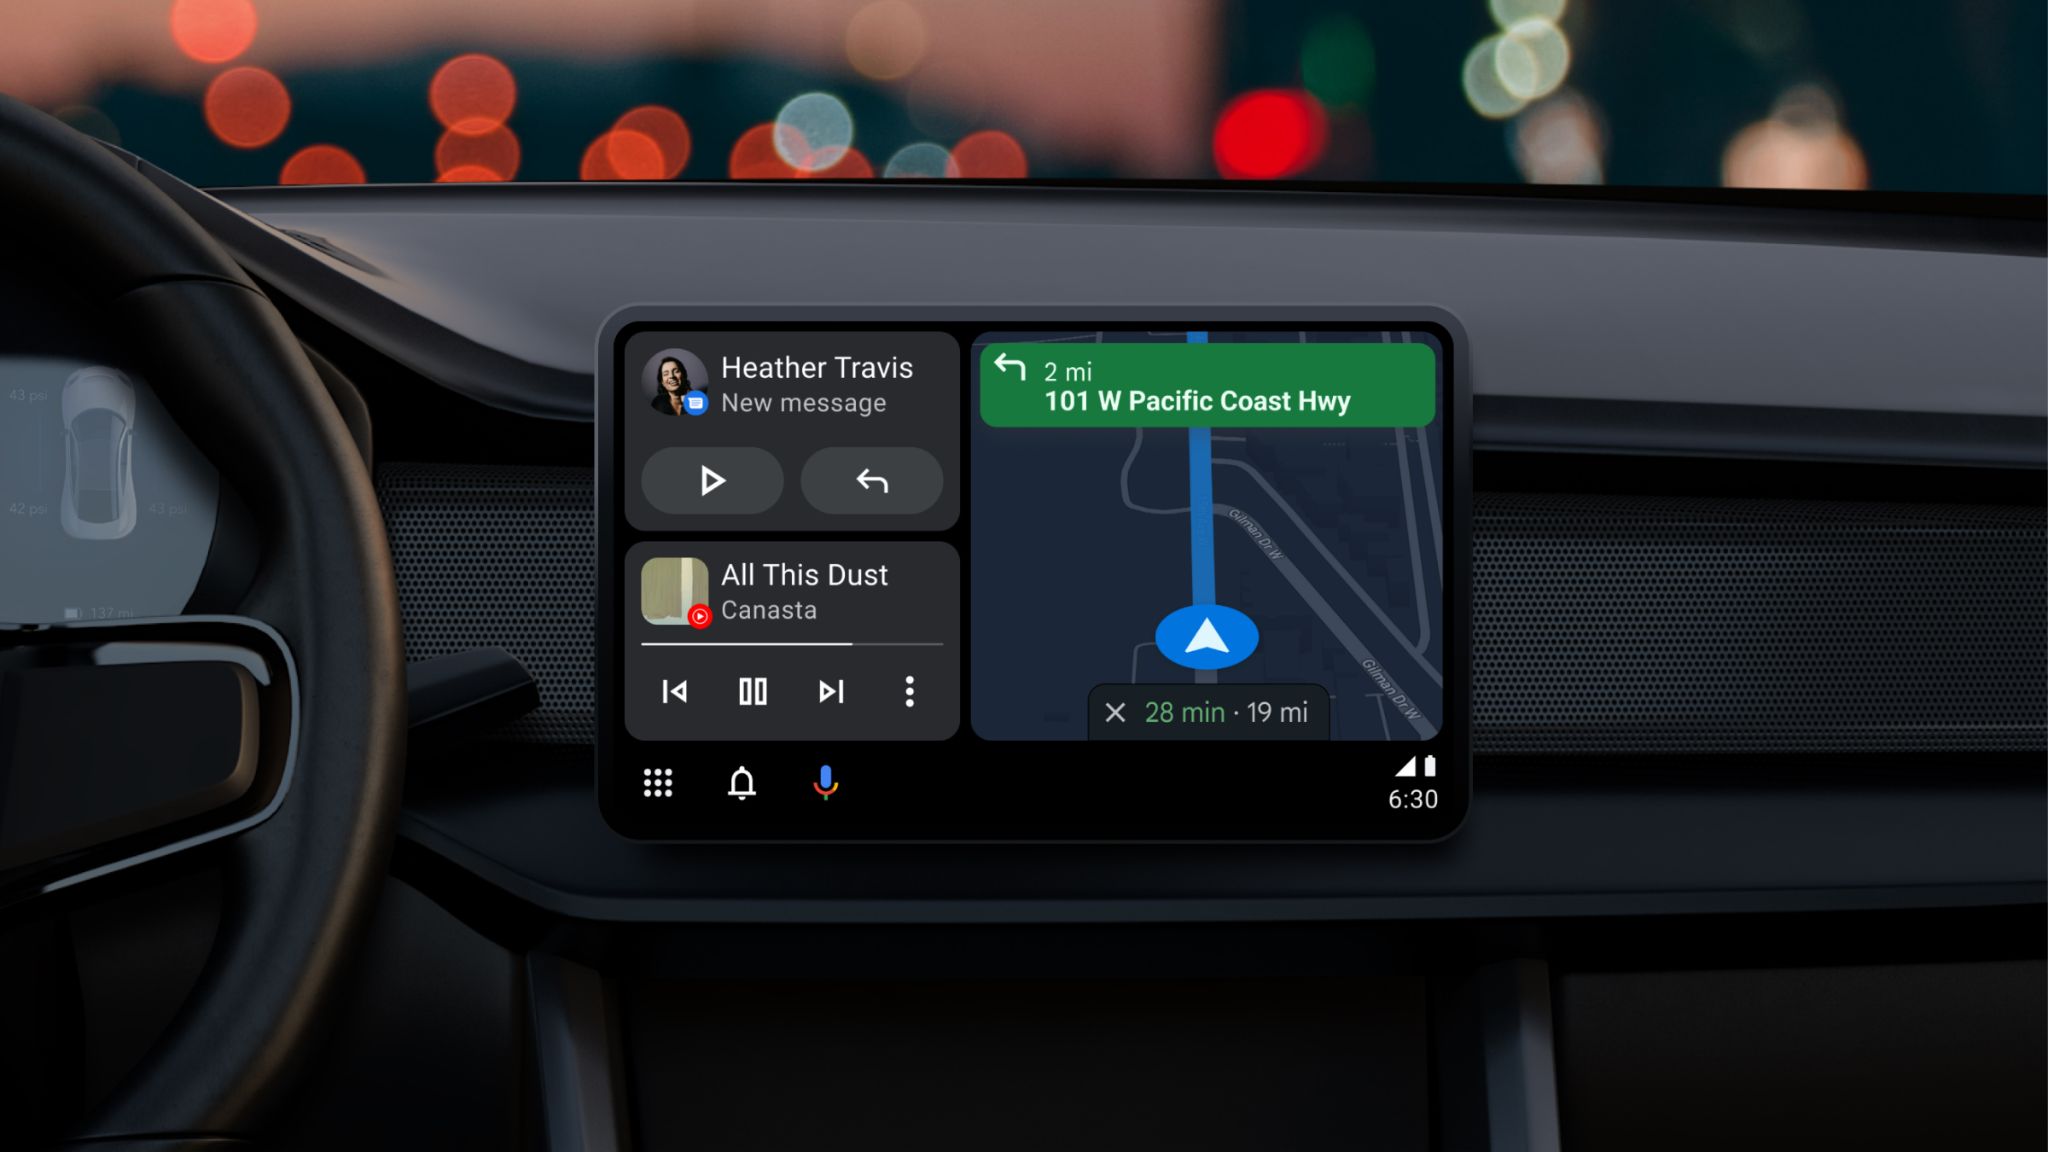 New Android Auto UI displayed in landscape mode on a car dashboard